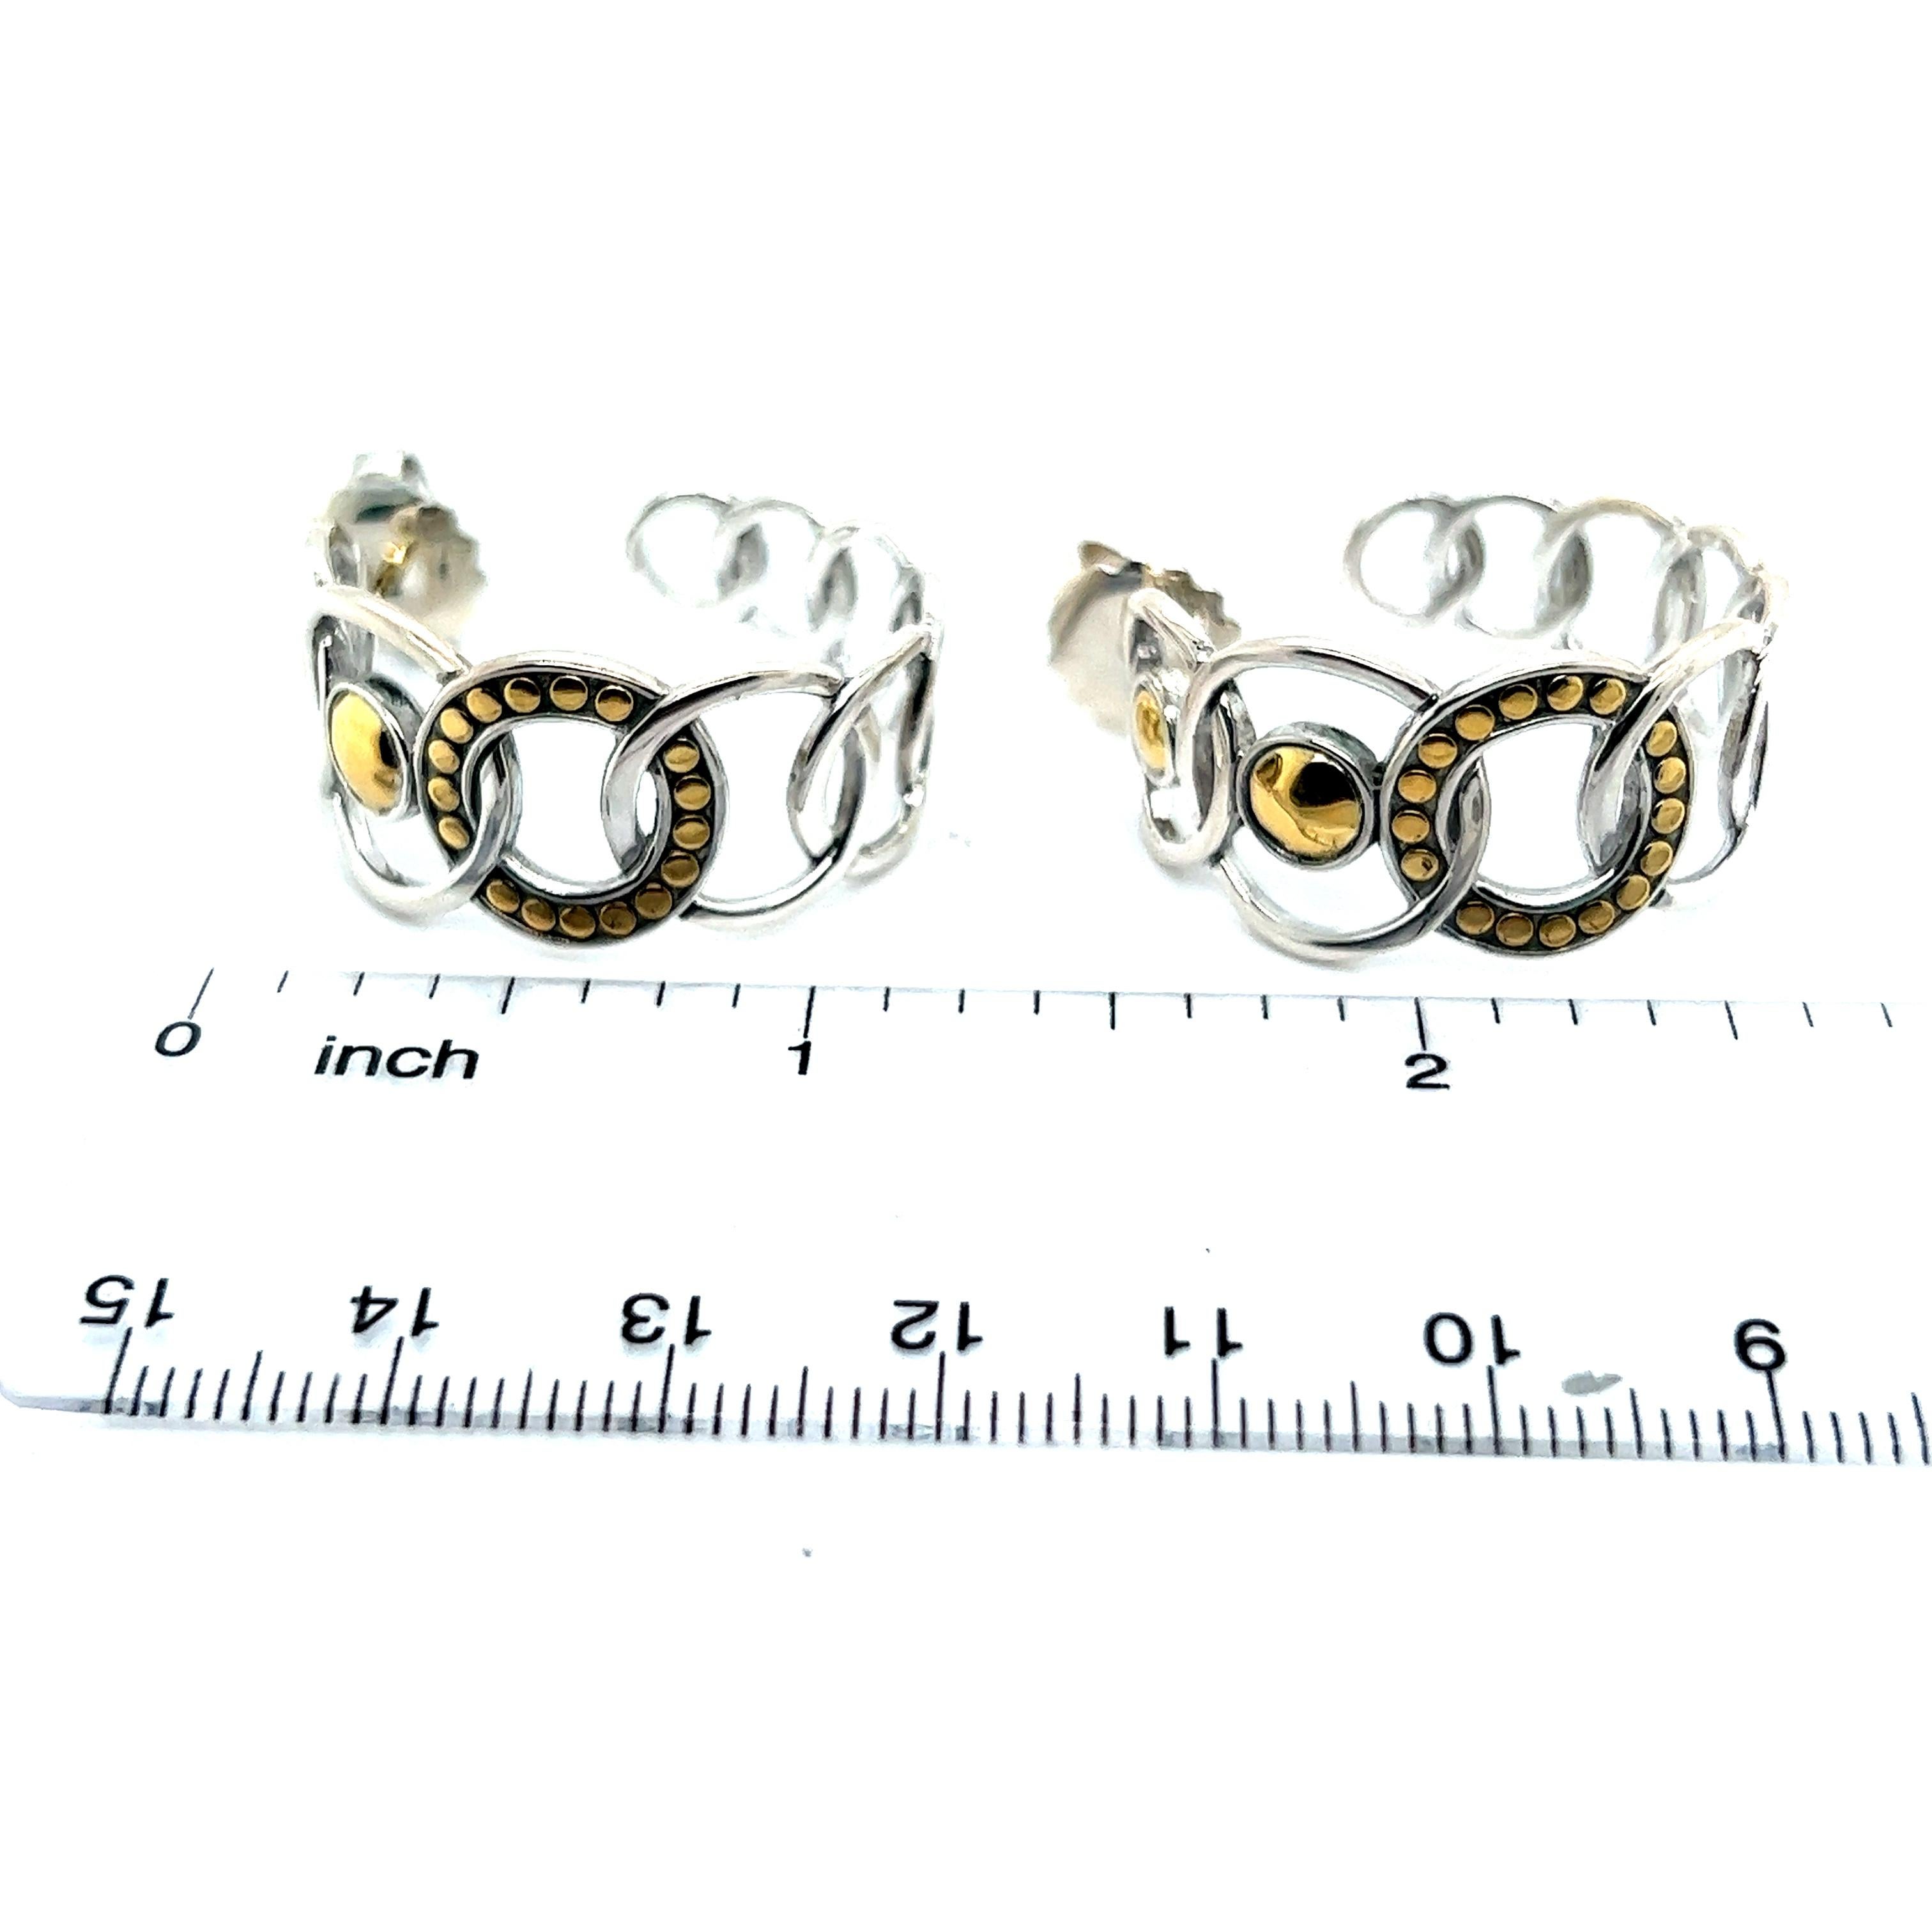 Authentic John Hardy Estate Hoop Earrings 22k Gold + Silver JH51

TRUSTED SELLER SINCE 2002

PLEASE SEE OUR HUNDREDS OF POSITIVE FEEDBACKS FROM OUR CLIENTS!!

FREE SHIPPING!!

DETAILS
Style: Hoop Earrings
Weight: 12.8 Grams
Metal: Sterling Silver +